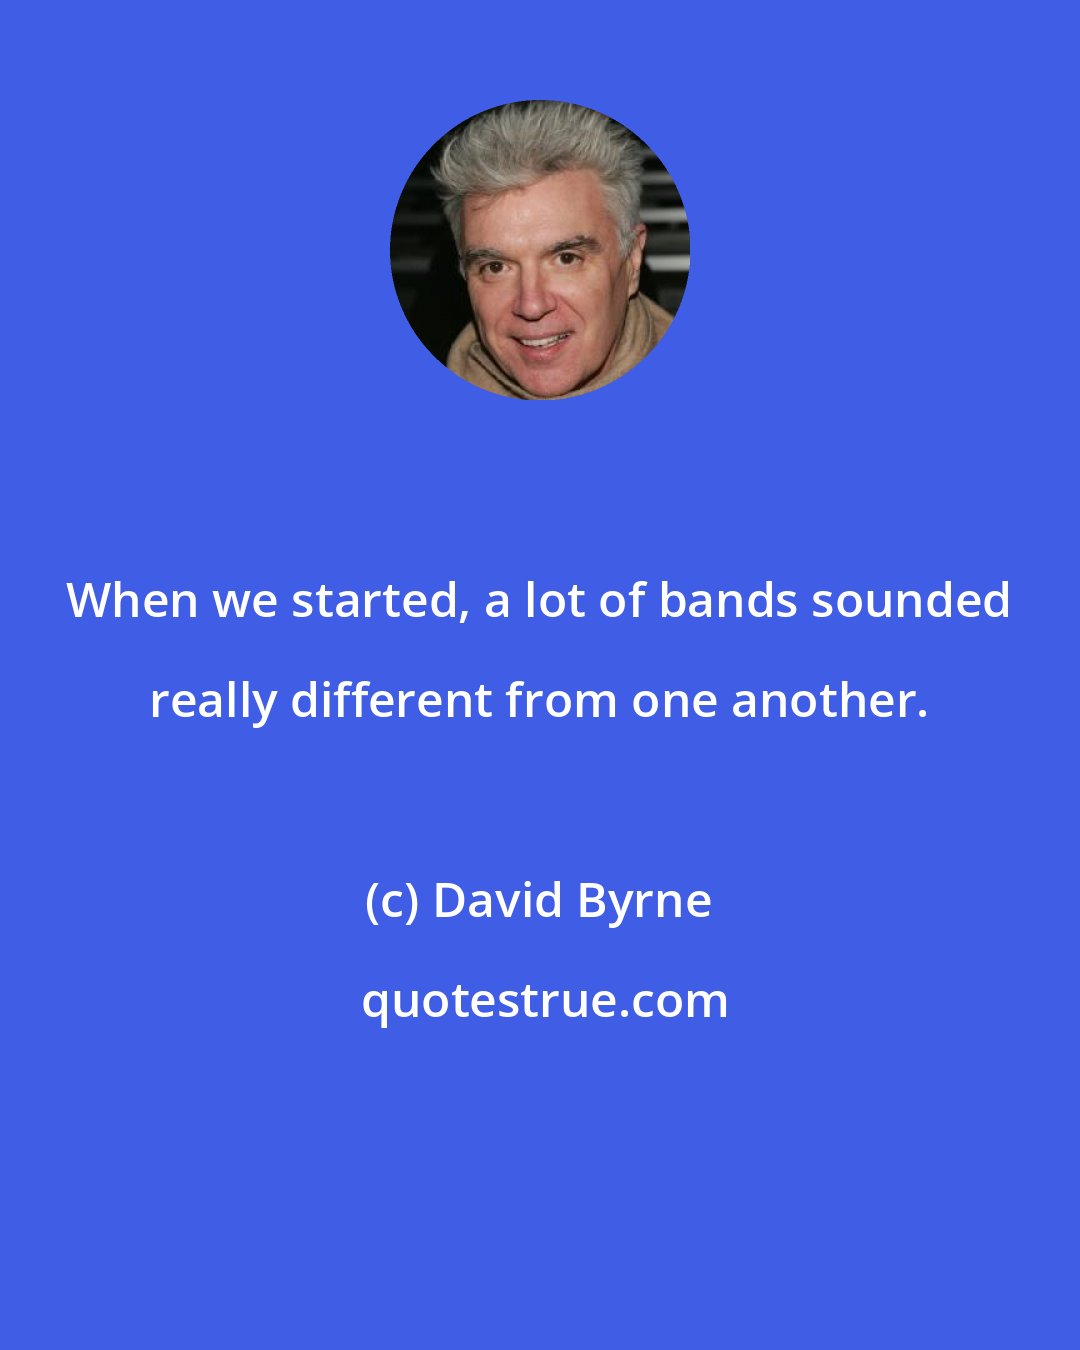 David Byrne: When we started, a lot of bands sounded really different from one another.